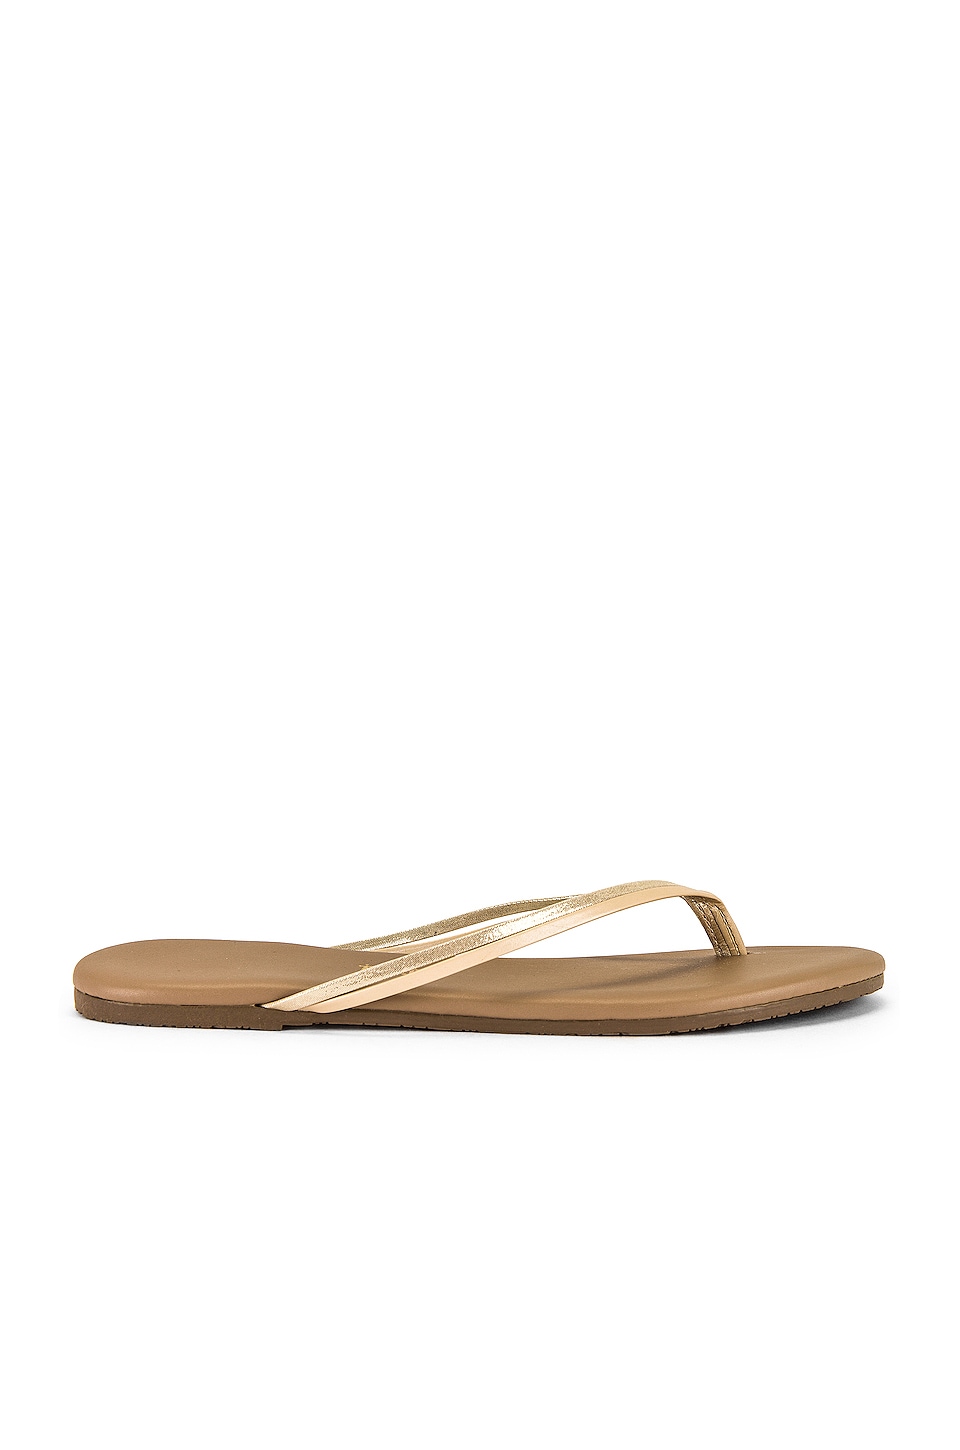 TKEES Duos Flip Flop in Oyster Shell REVOLVE